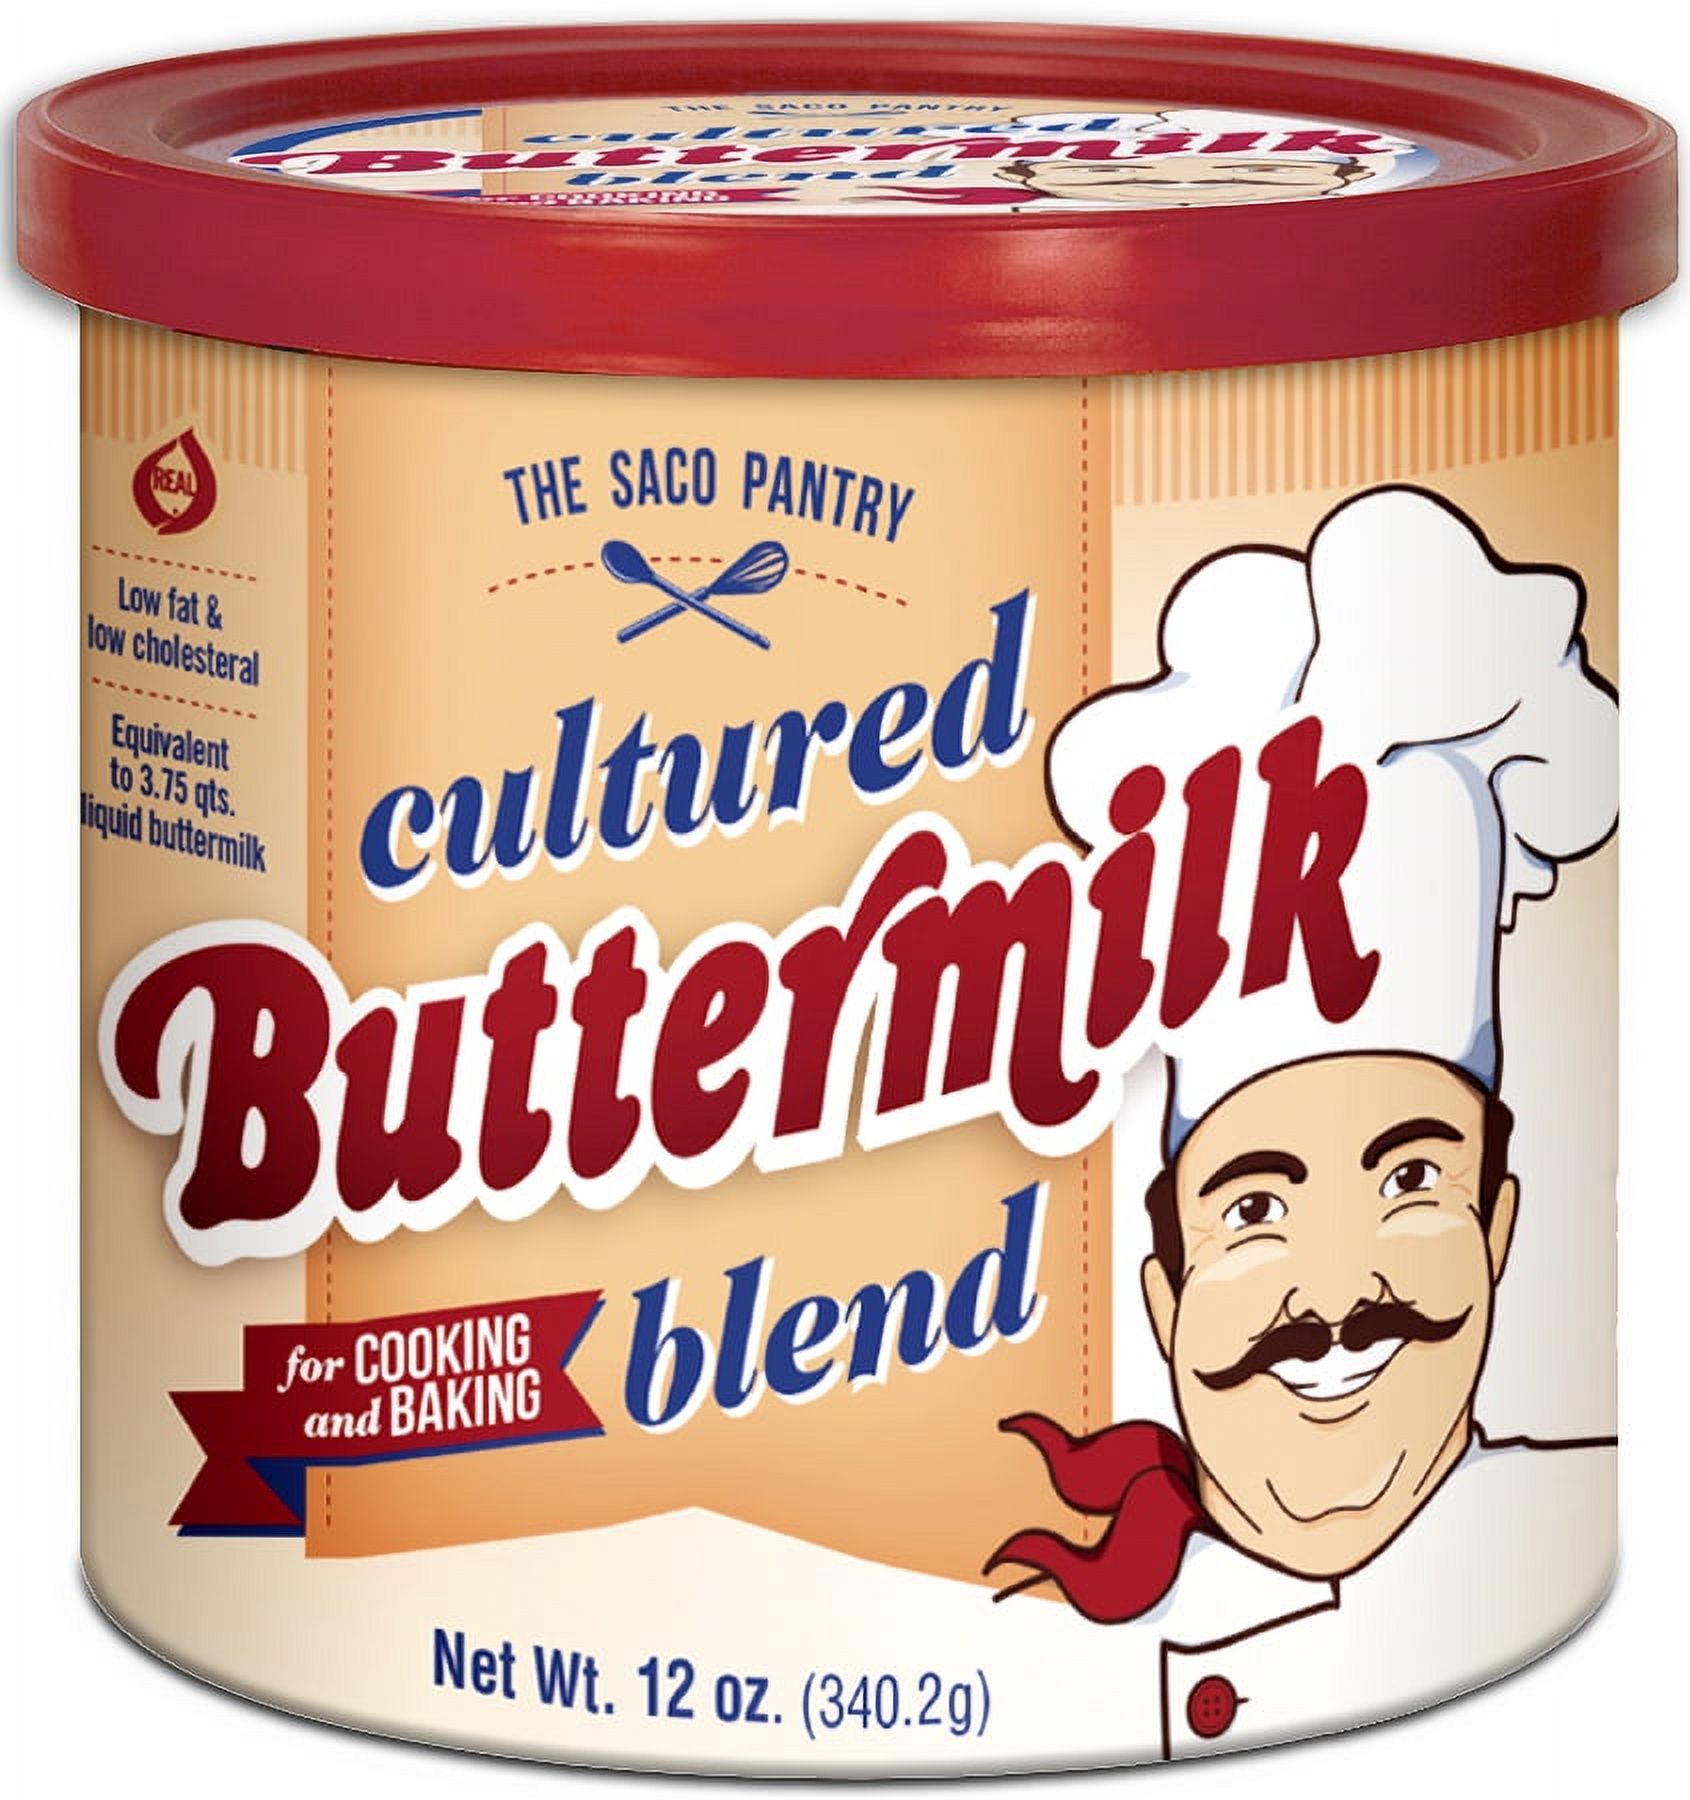 The Saco Pantry Cultured Buttermilk Blend Powder, 12 oz Tub, Gluten-Free, Treen Nut Free and Peanut Free - image 1 of 8